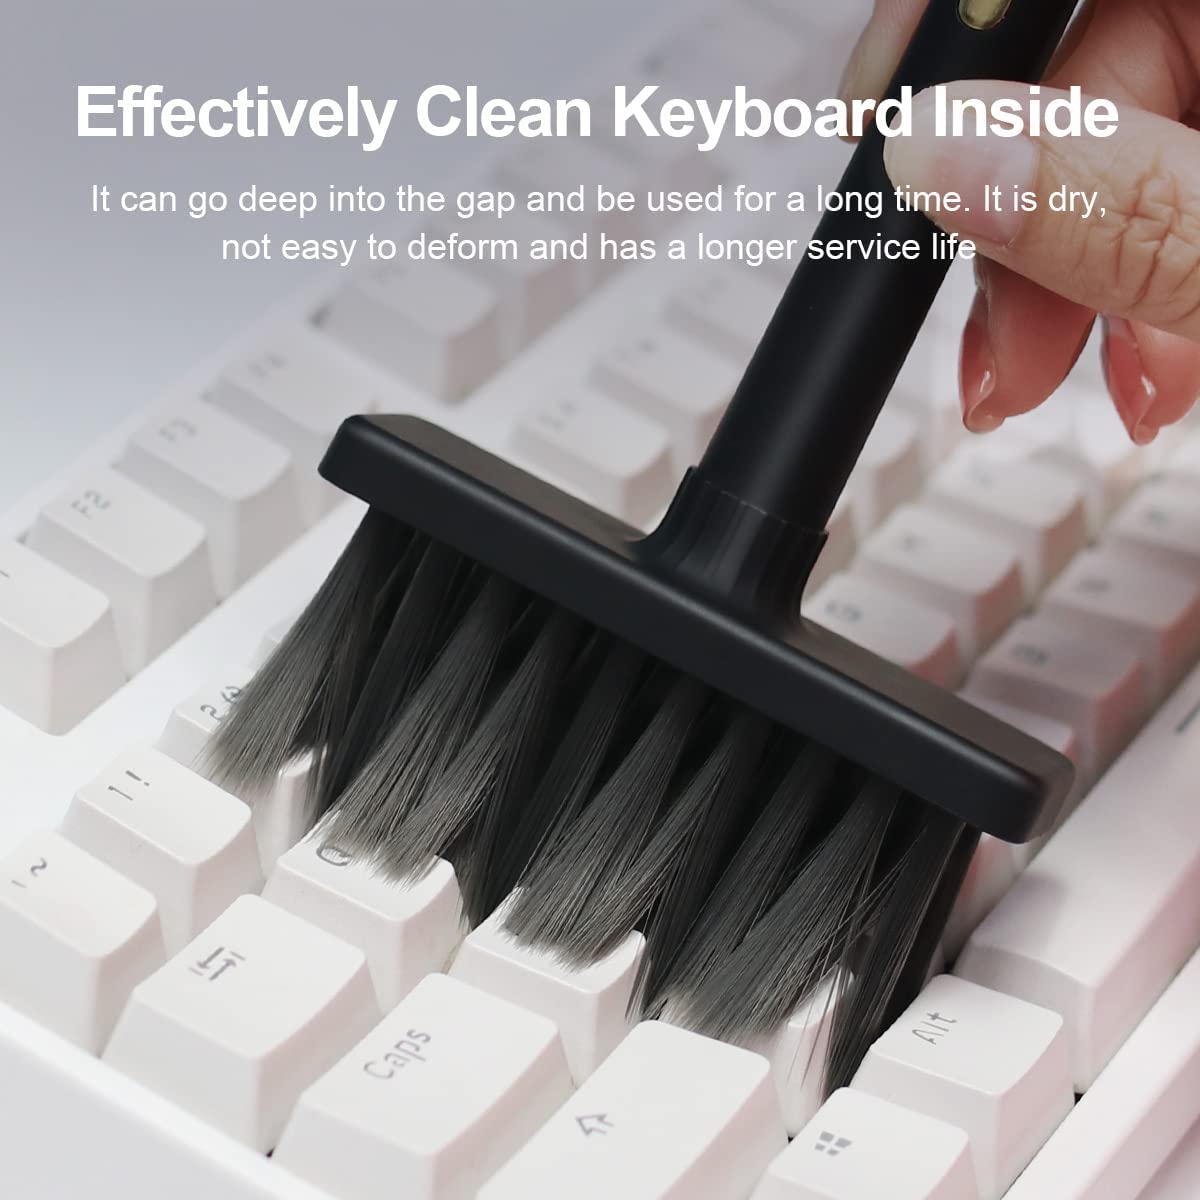 Cleaning soft brush 5 in 1 Keyboard & Earphone Cleaning brush / Keyboard,  Laptop, Ear pods Ear pods case soft cleaning brush / All in one Gadget  cleaning brush, Computer cleaning tool kit